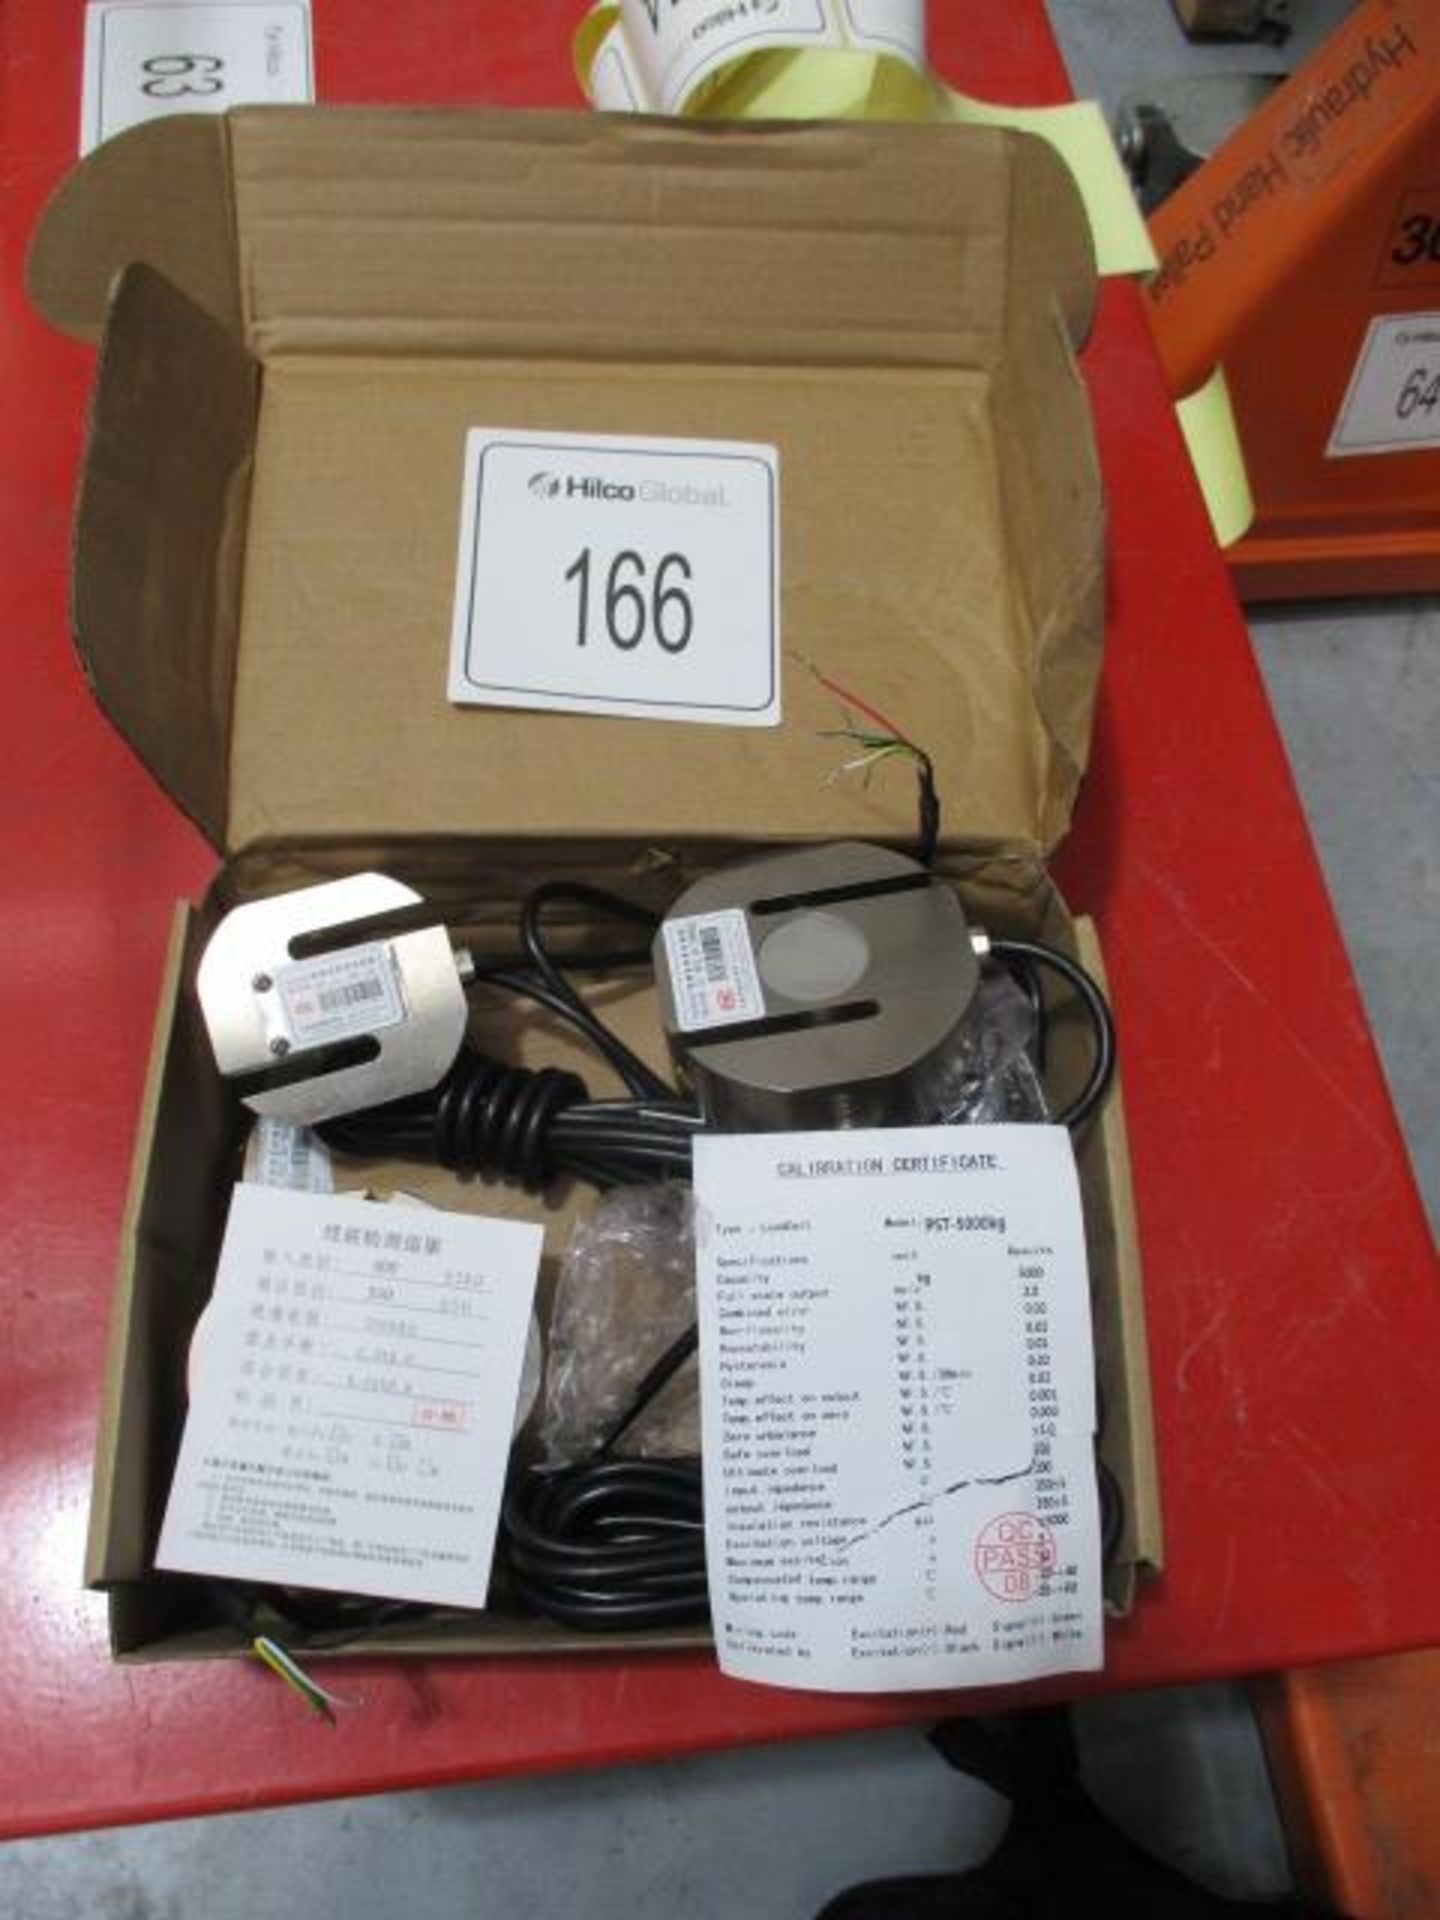 4, Pushton PTS 5,000 Kilo Load Cells Pressure Weighing Sensors and 1, 500 Kilo Load Cell as Lotted